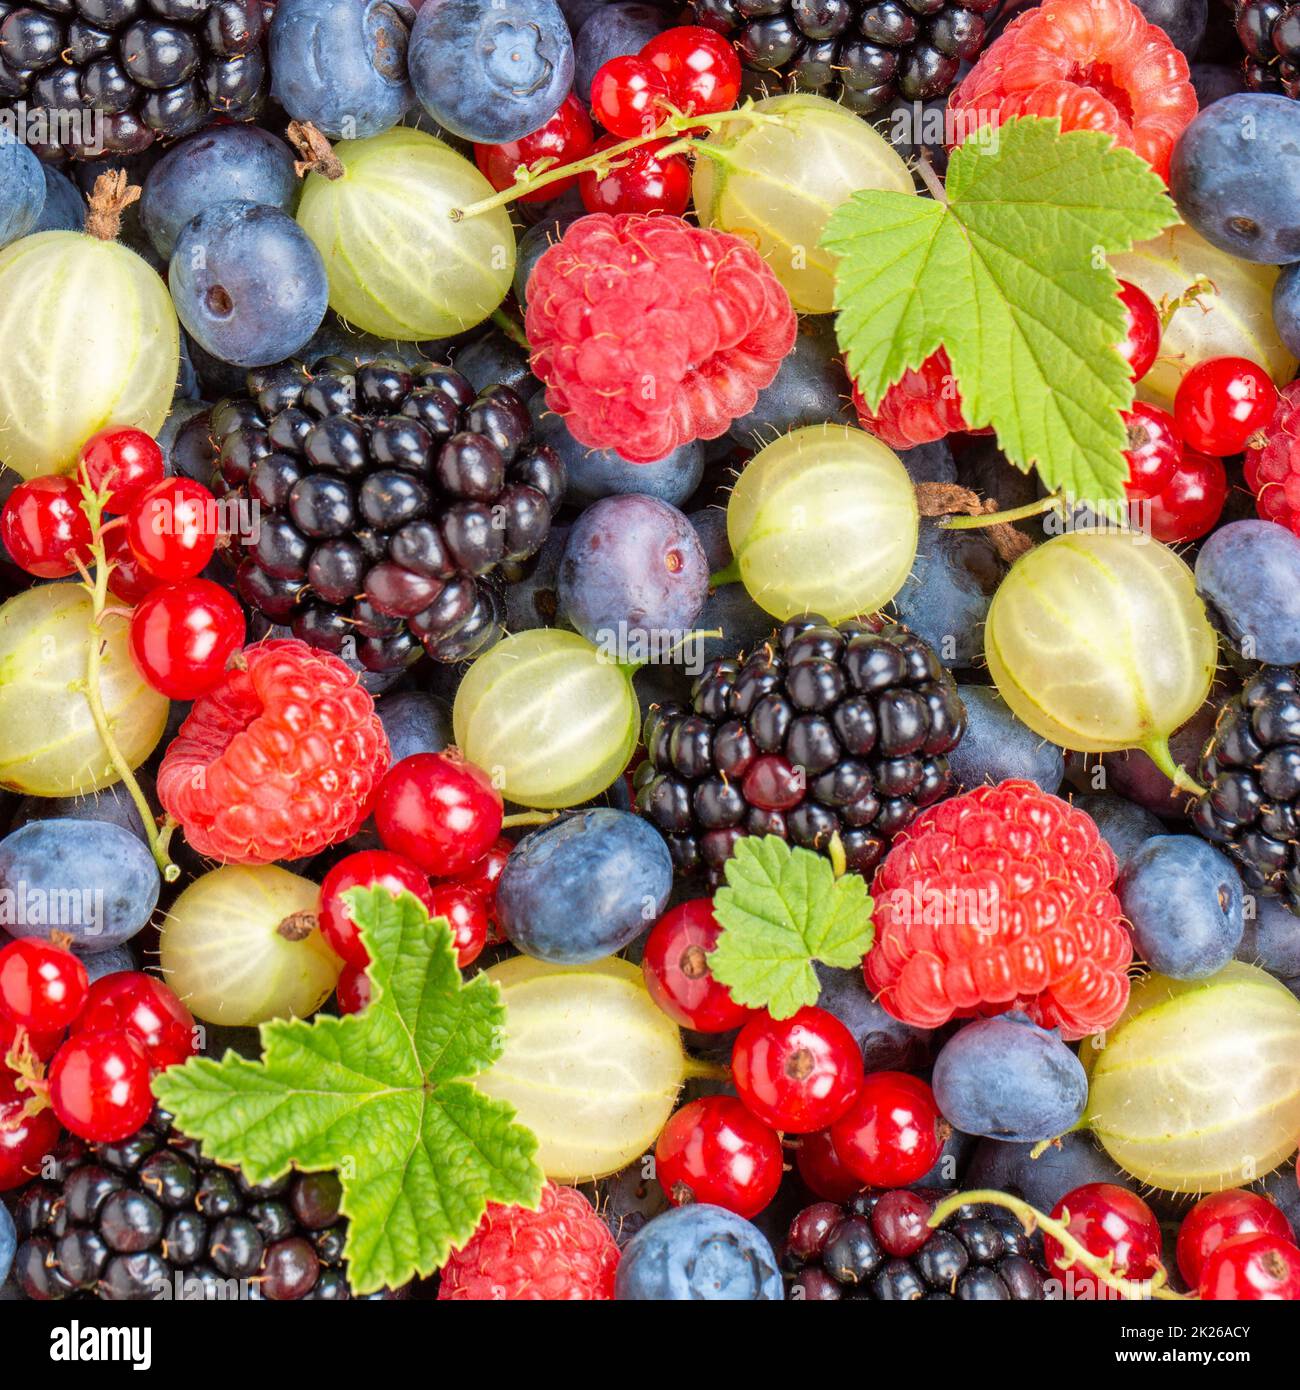 Berries fruits berry fruit strawberries strawberry blueberries blueberry from above square Stock Photo